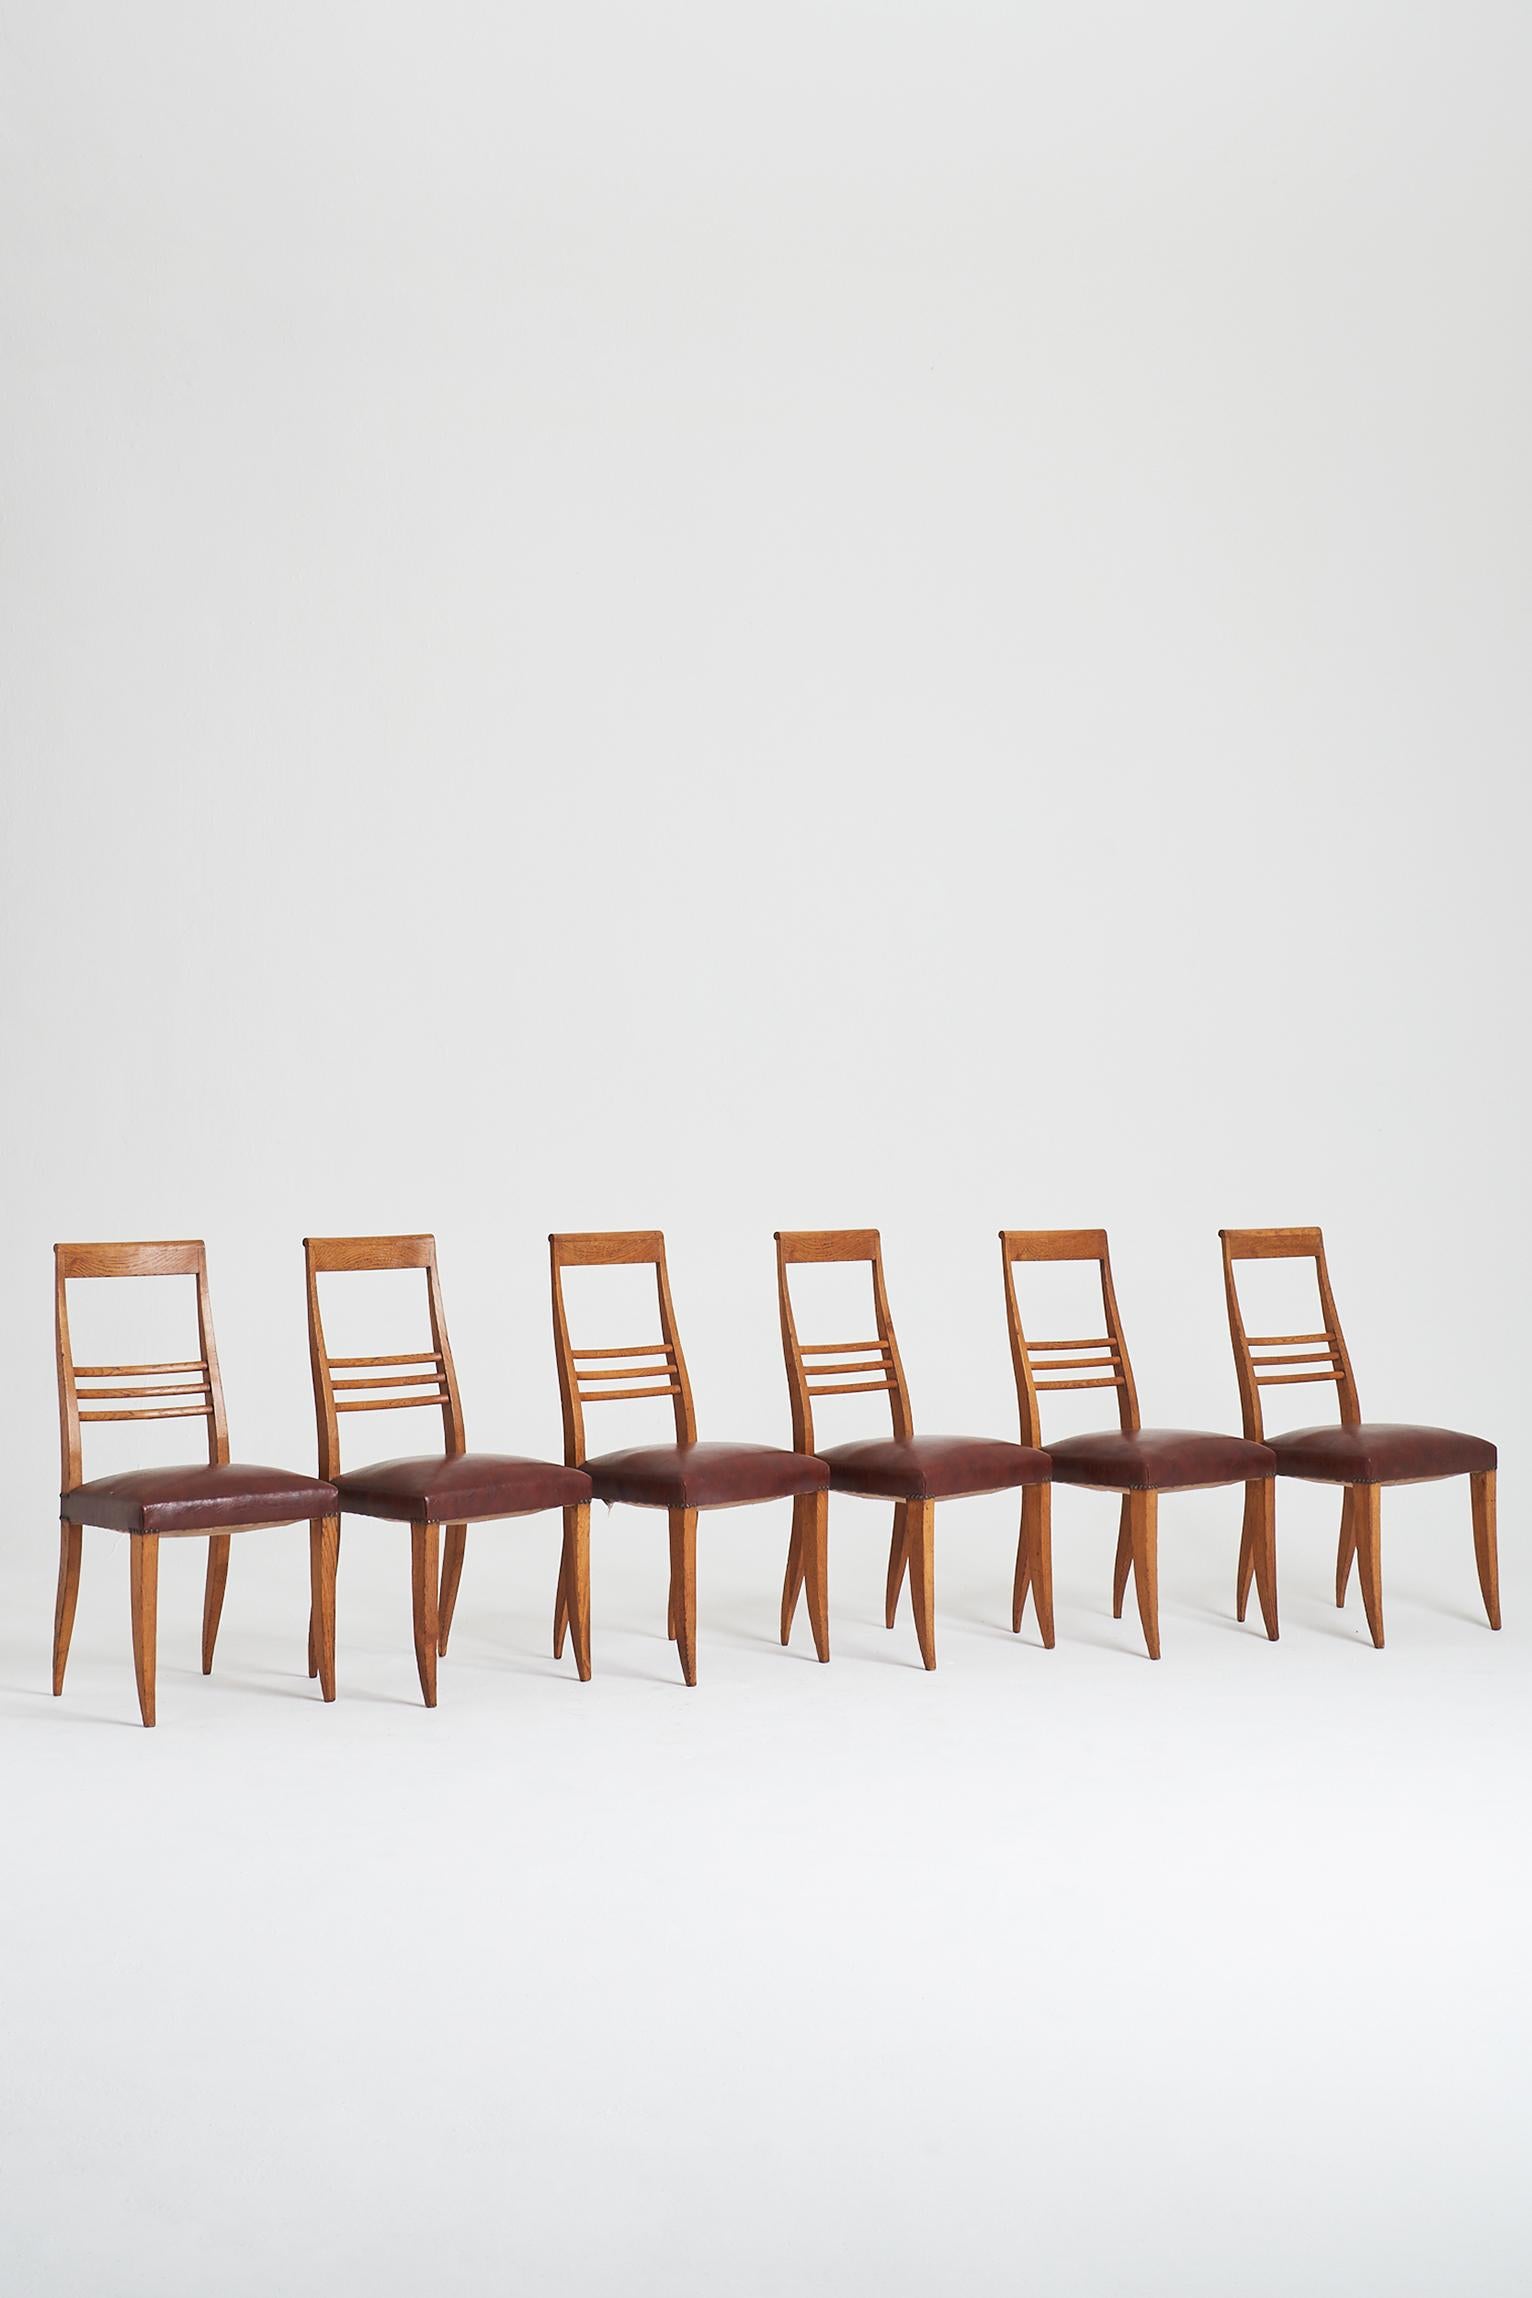 20th Century Set of 6 Art Deco Dining Chairs